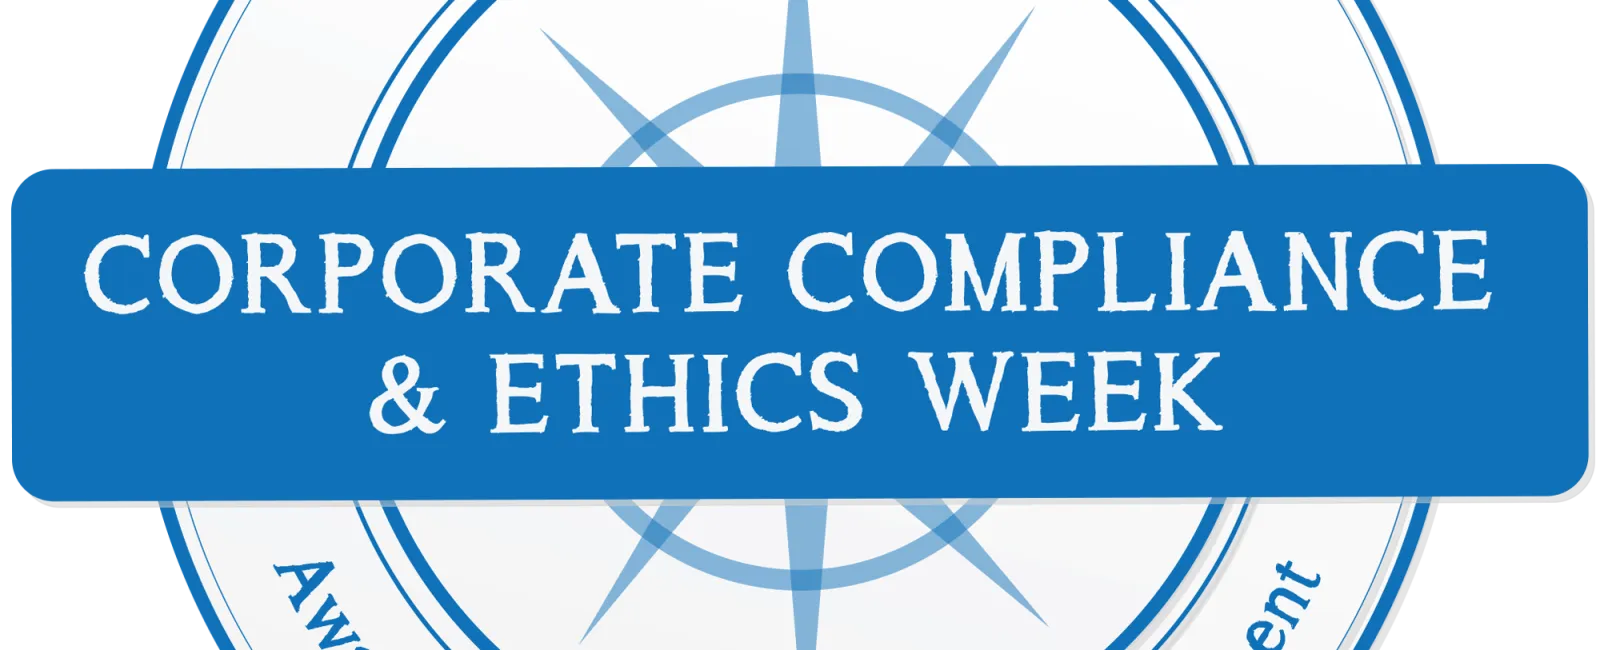 Corporate Compliance and Ethics Week - November 7 to 13, 2021 by SCCE